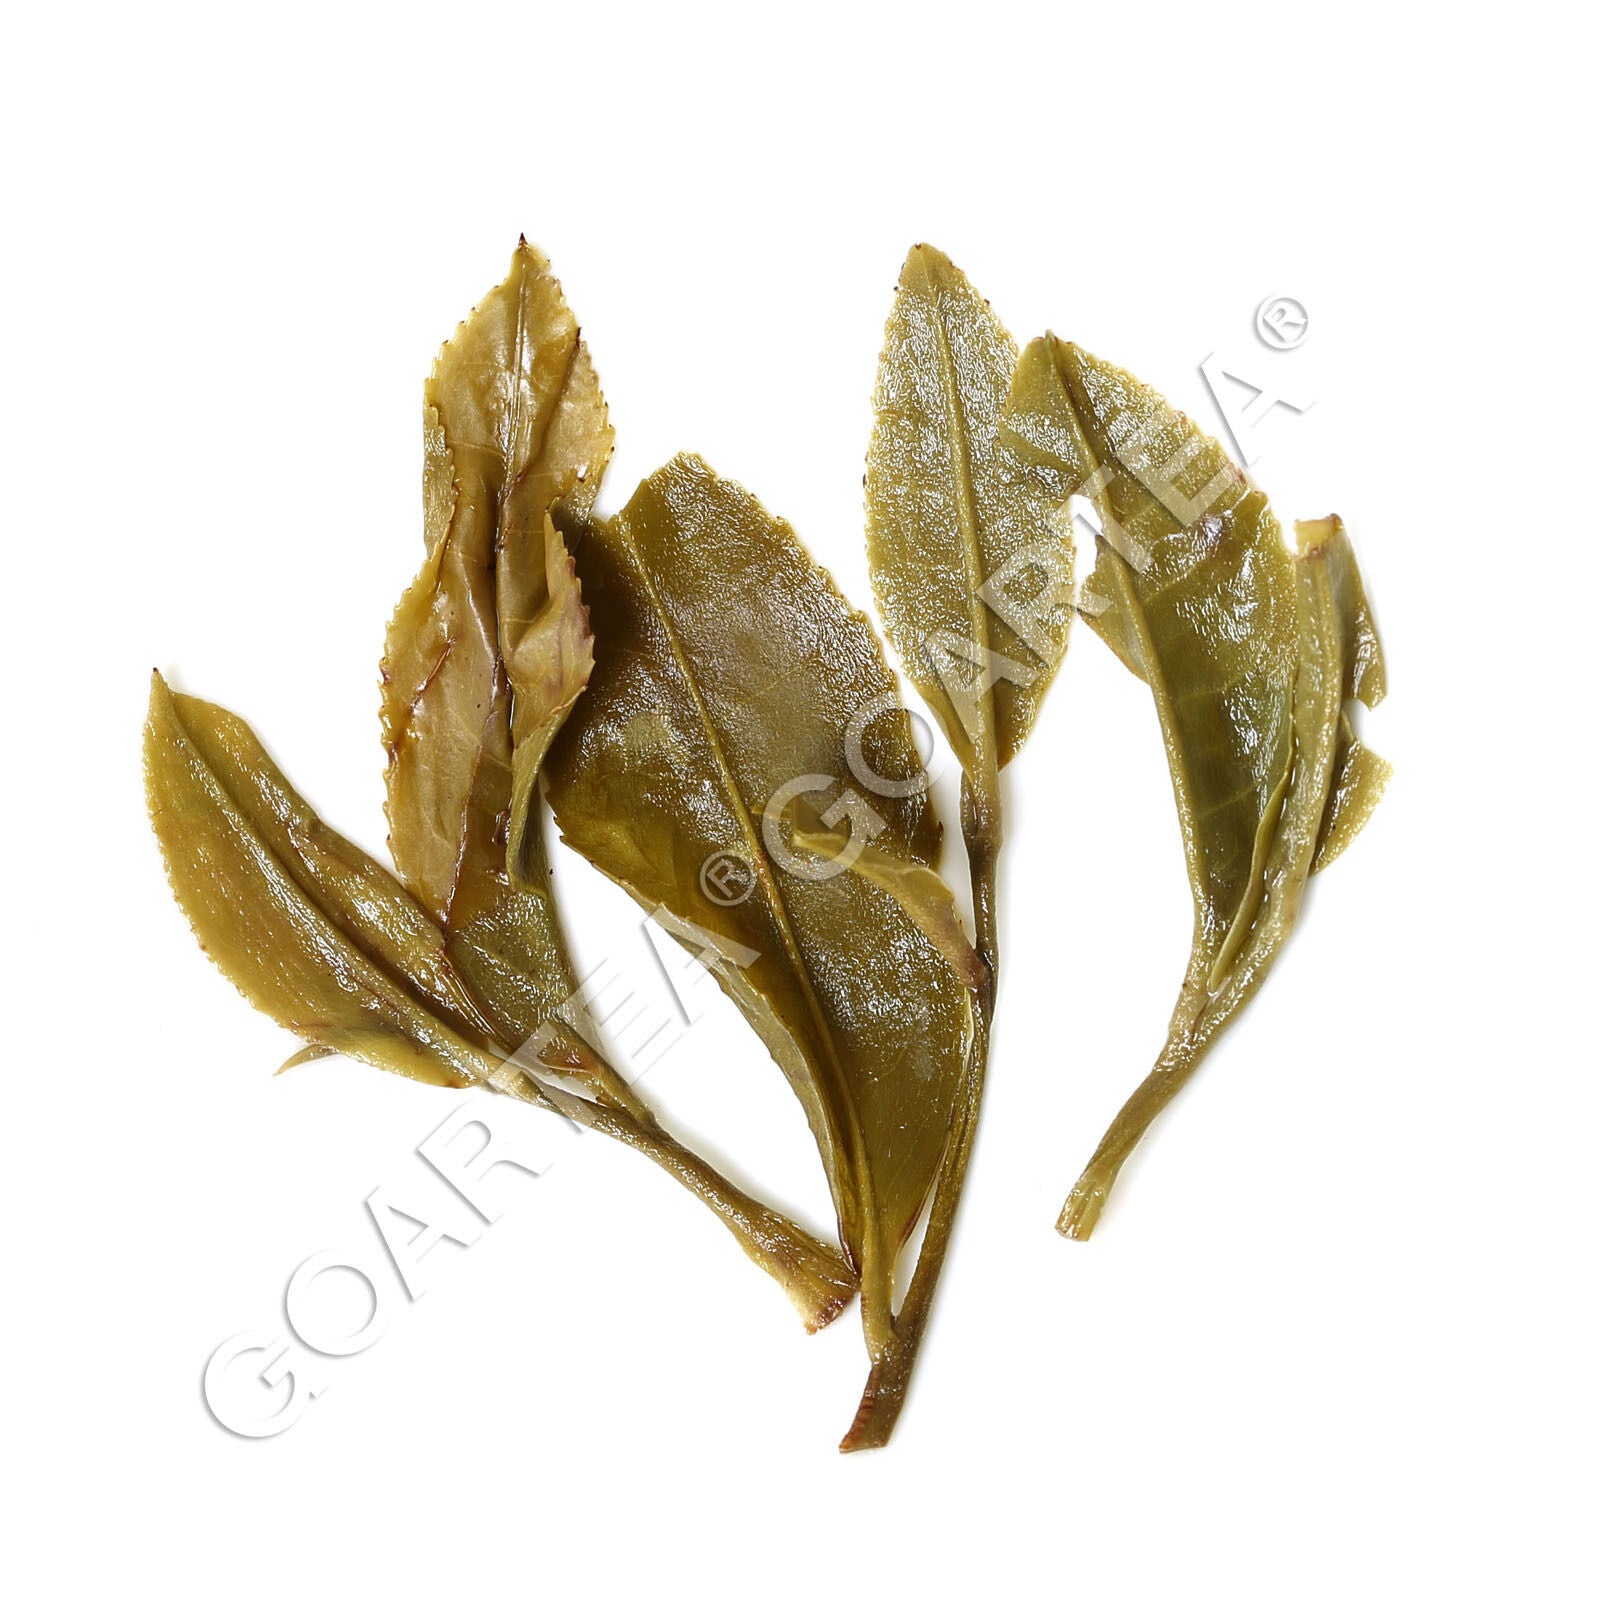 HelloYoung HELLOYOUNG Premium Jasmine Dragon Pearl Loose Leaf Chinese Green Tea Hand Rolled